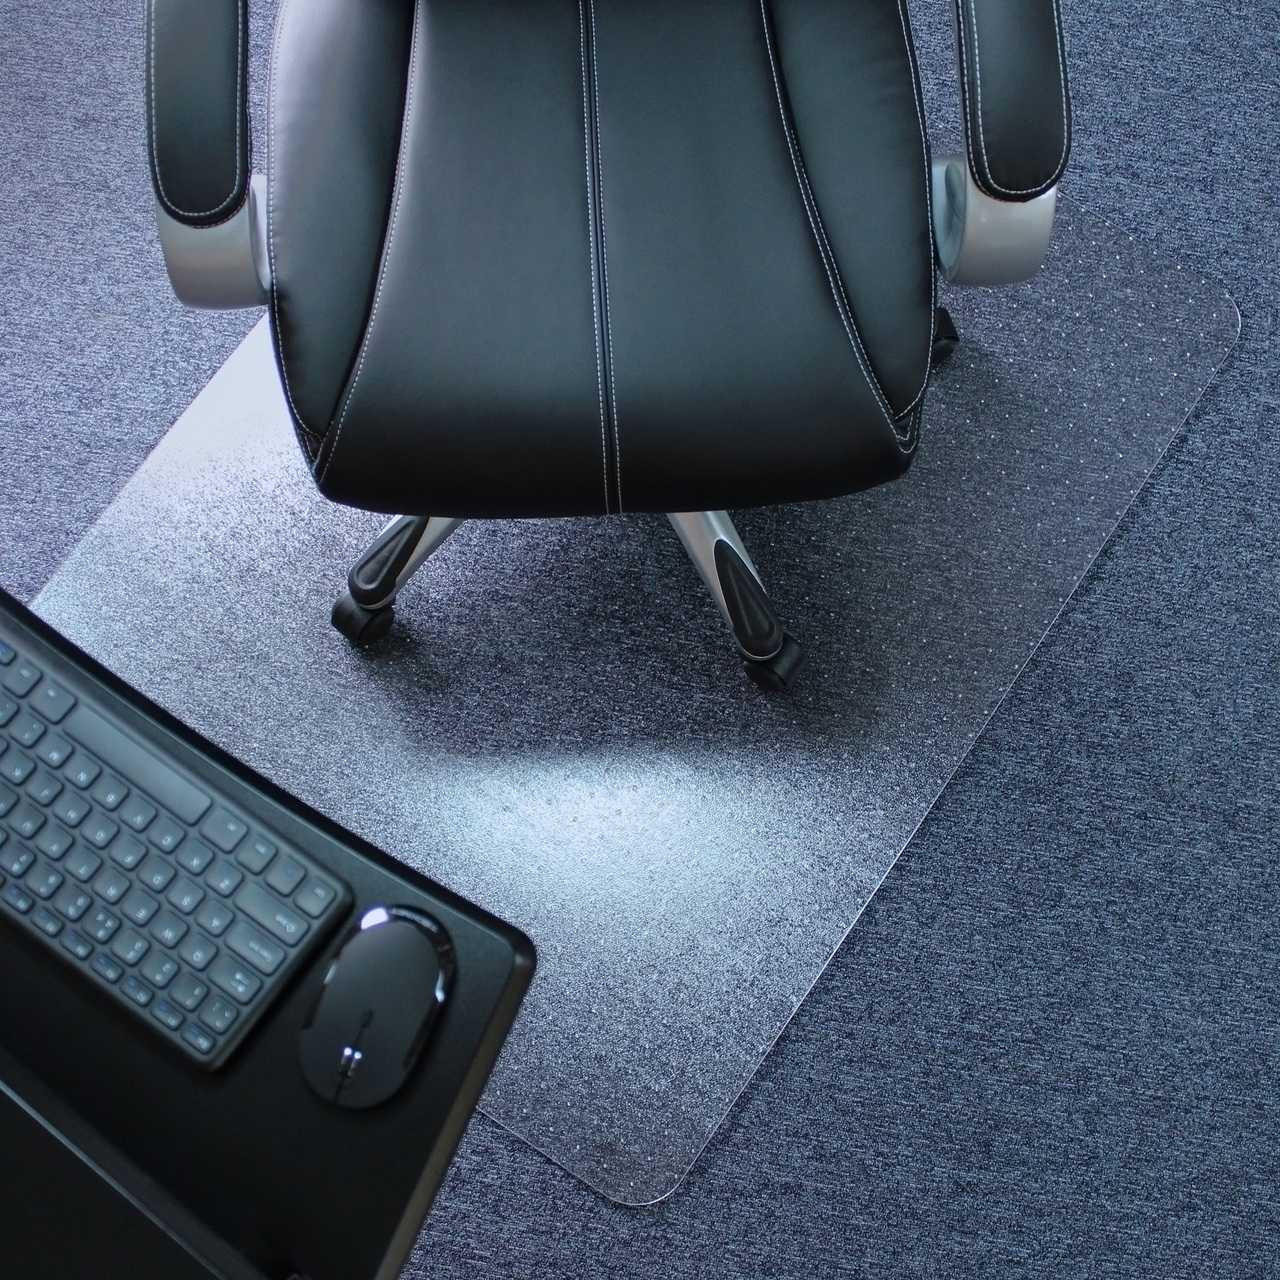 https://cdn11.bigcommerce.com/s-fjwps1jbkv/images/stencil/1280x1280/products/141/3944/marvelux-polycarbonate-pc-rectangular-chair-mat-for-low-standard-and-medium-pile-carpets-12-thick-or-less-or-transparent-carpet-protector-or-multiple-sizes__83539.1689079428.jpg?c=2?imbypass=on